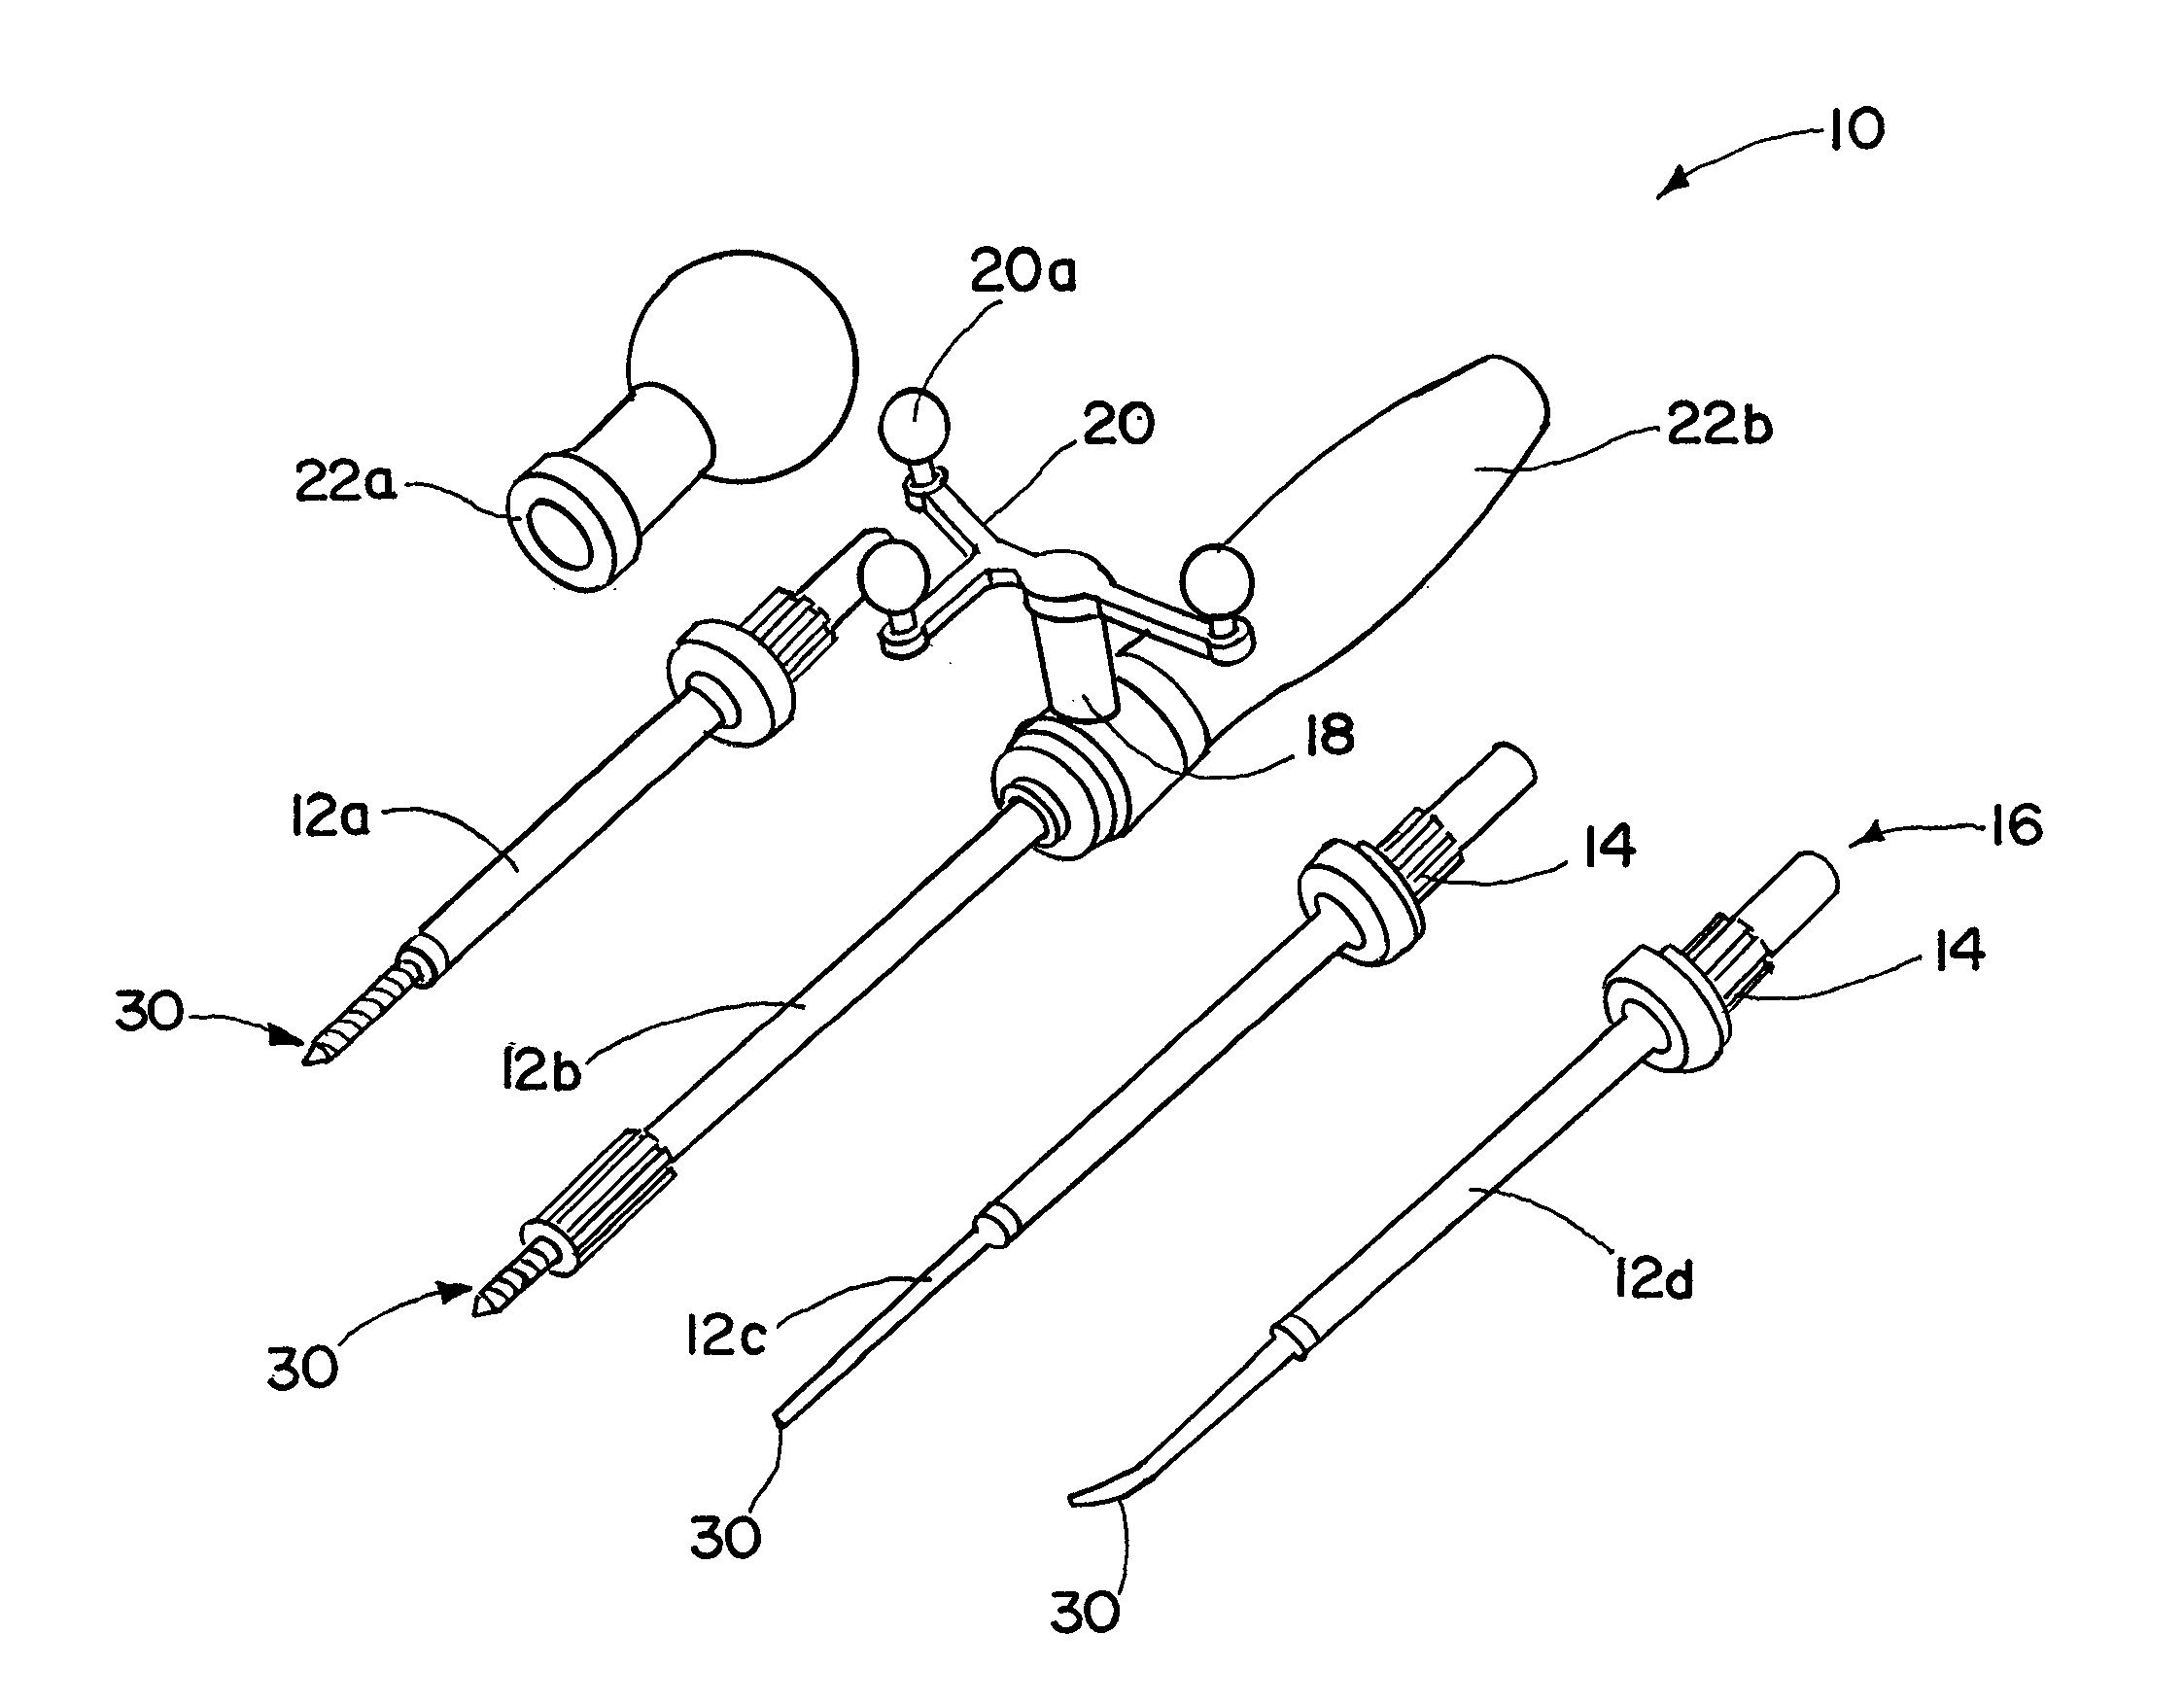 Universal instrument or instrument set for computer guided surgery